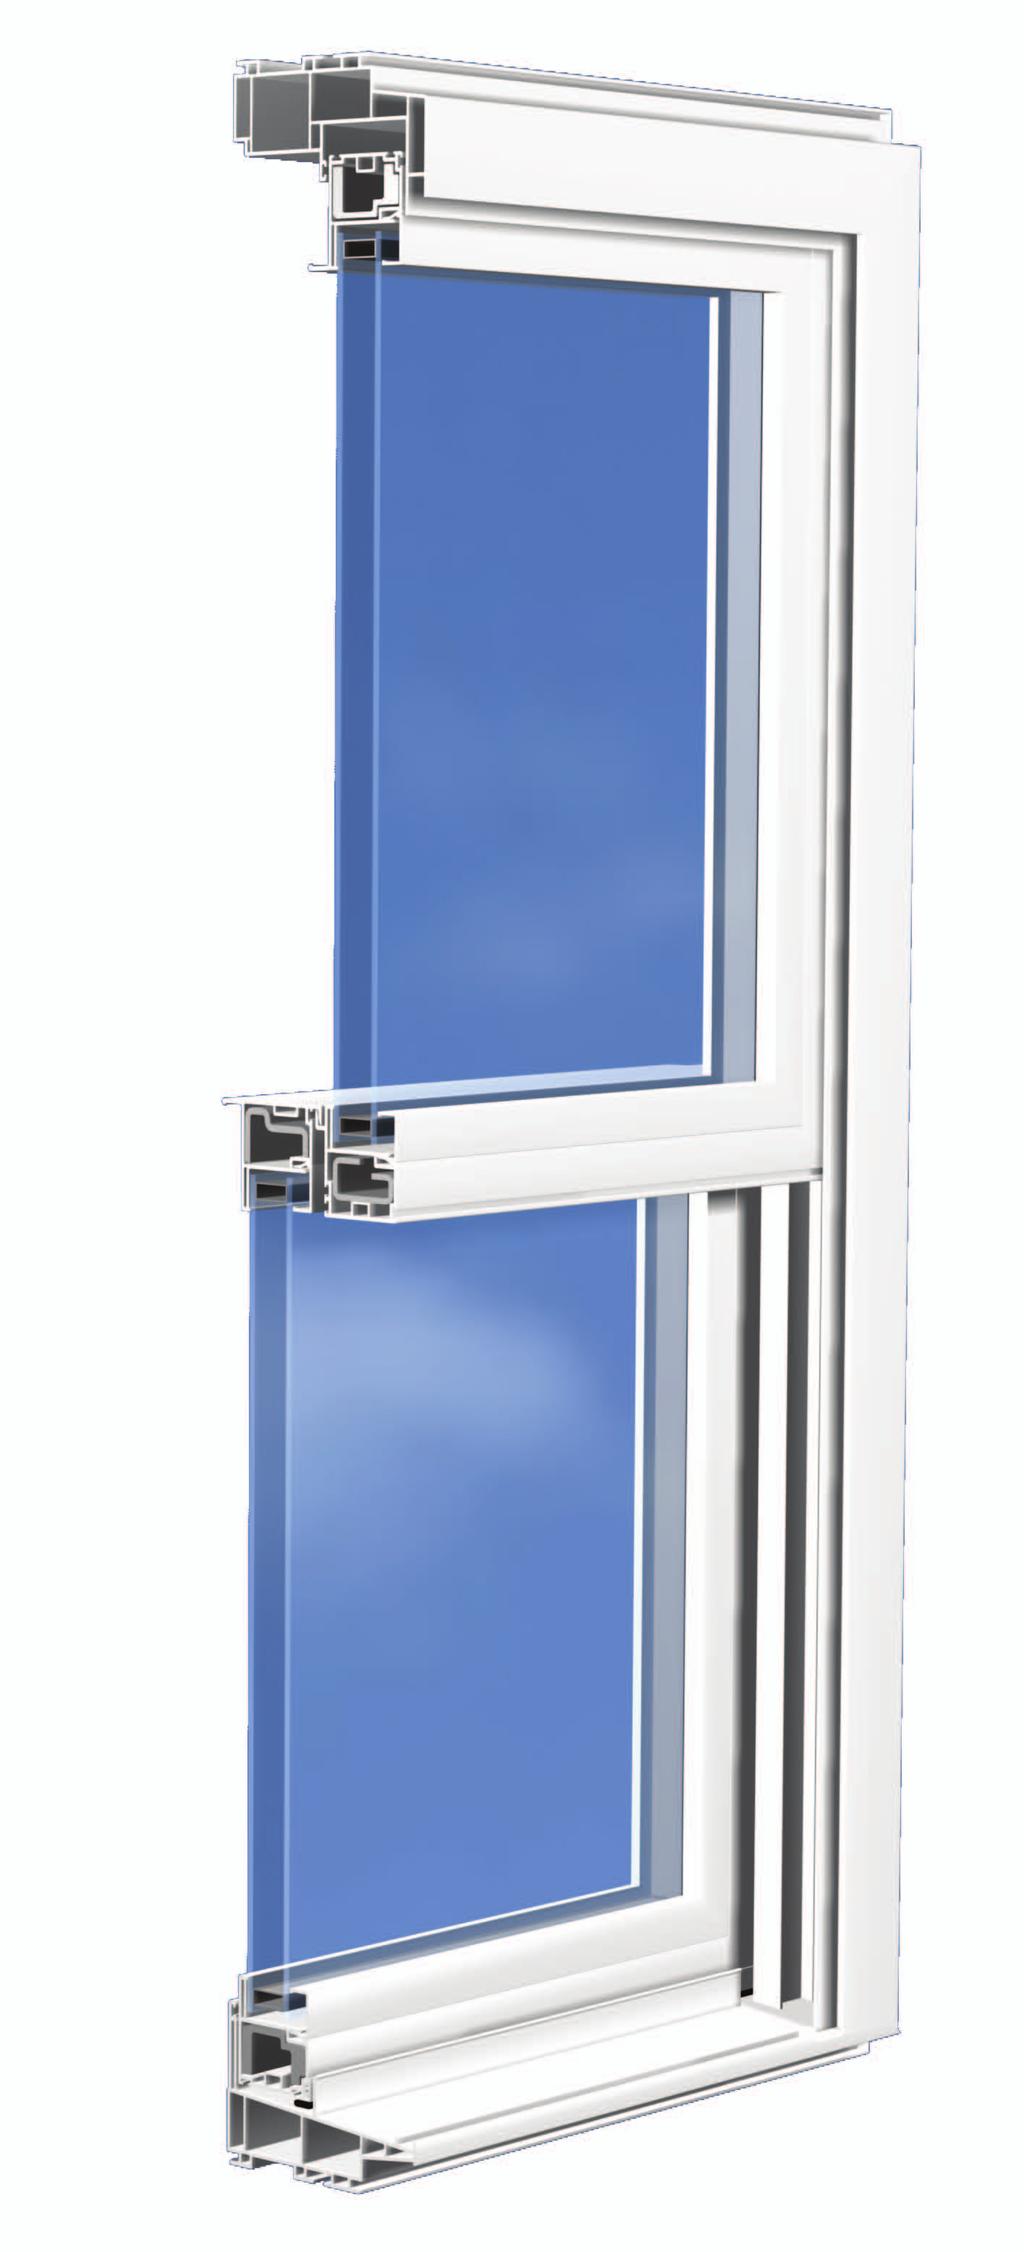 No longer is the status quo acceptable for commercial window and door specifiers.